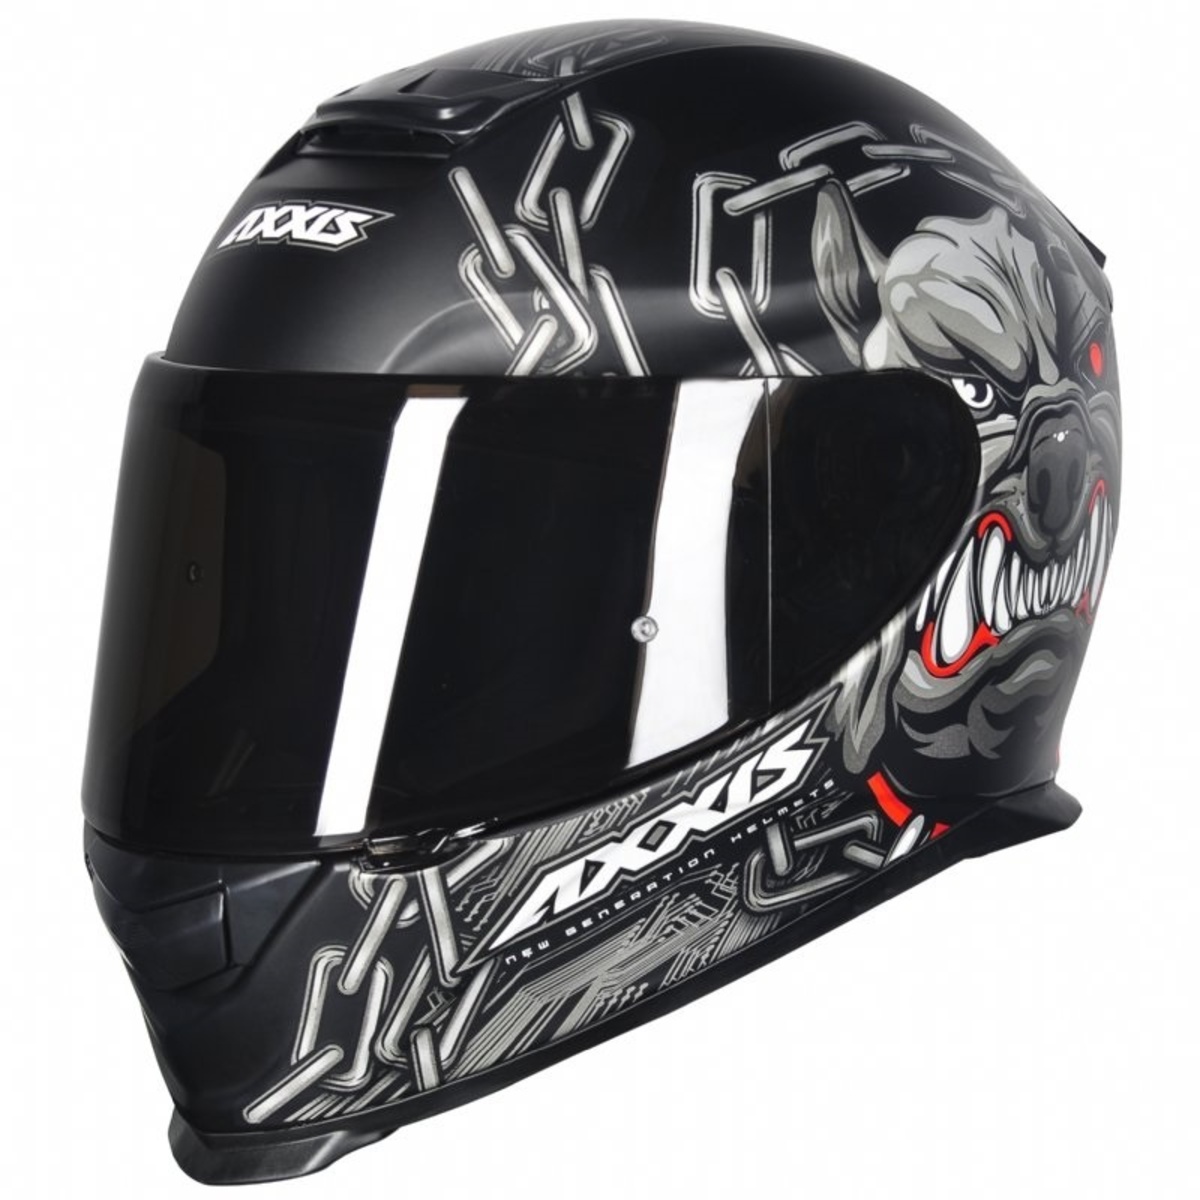 CAPACETE AXXIS EAGLE BULL CYBER MATTE BLACK/GREY 56/S